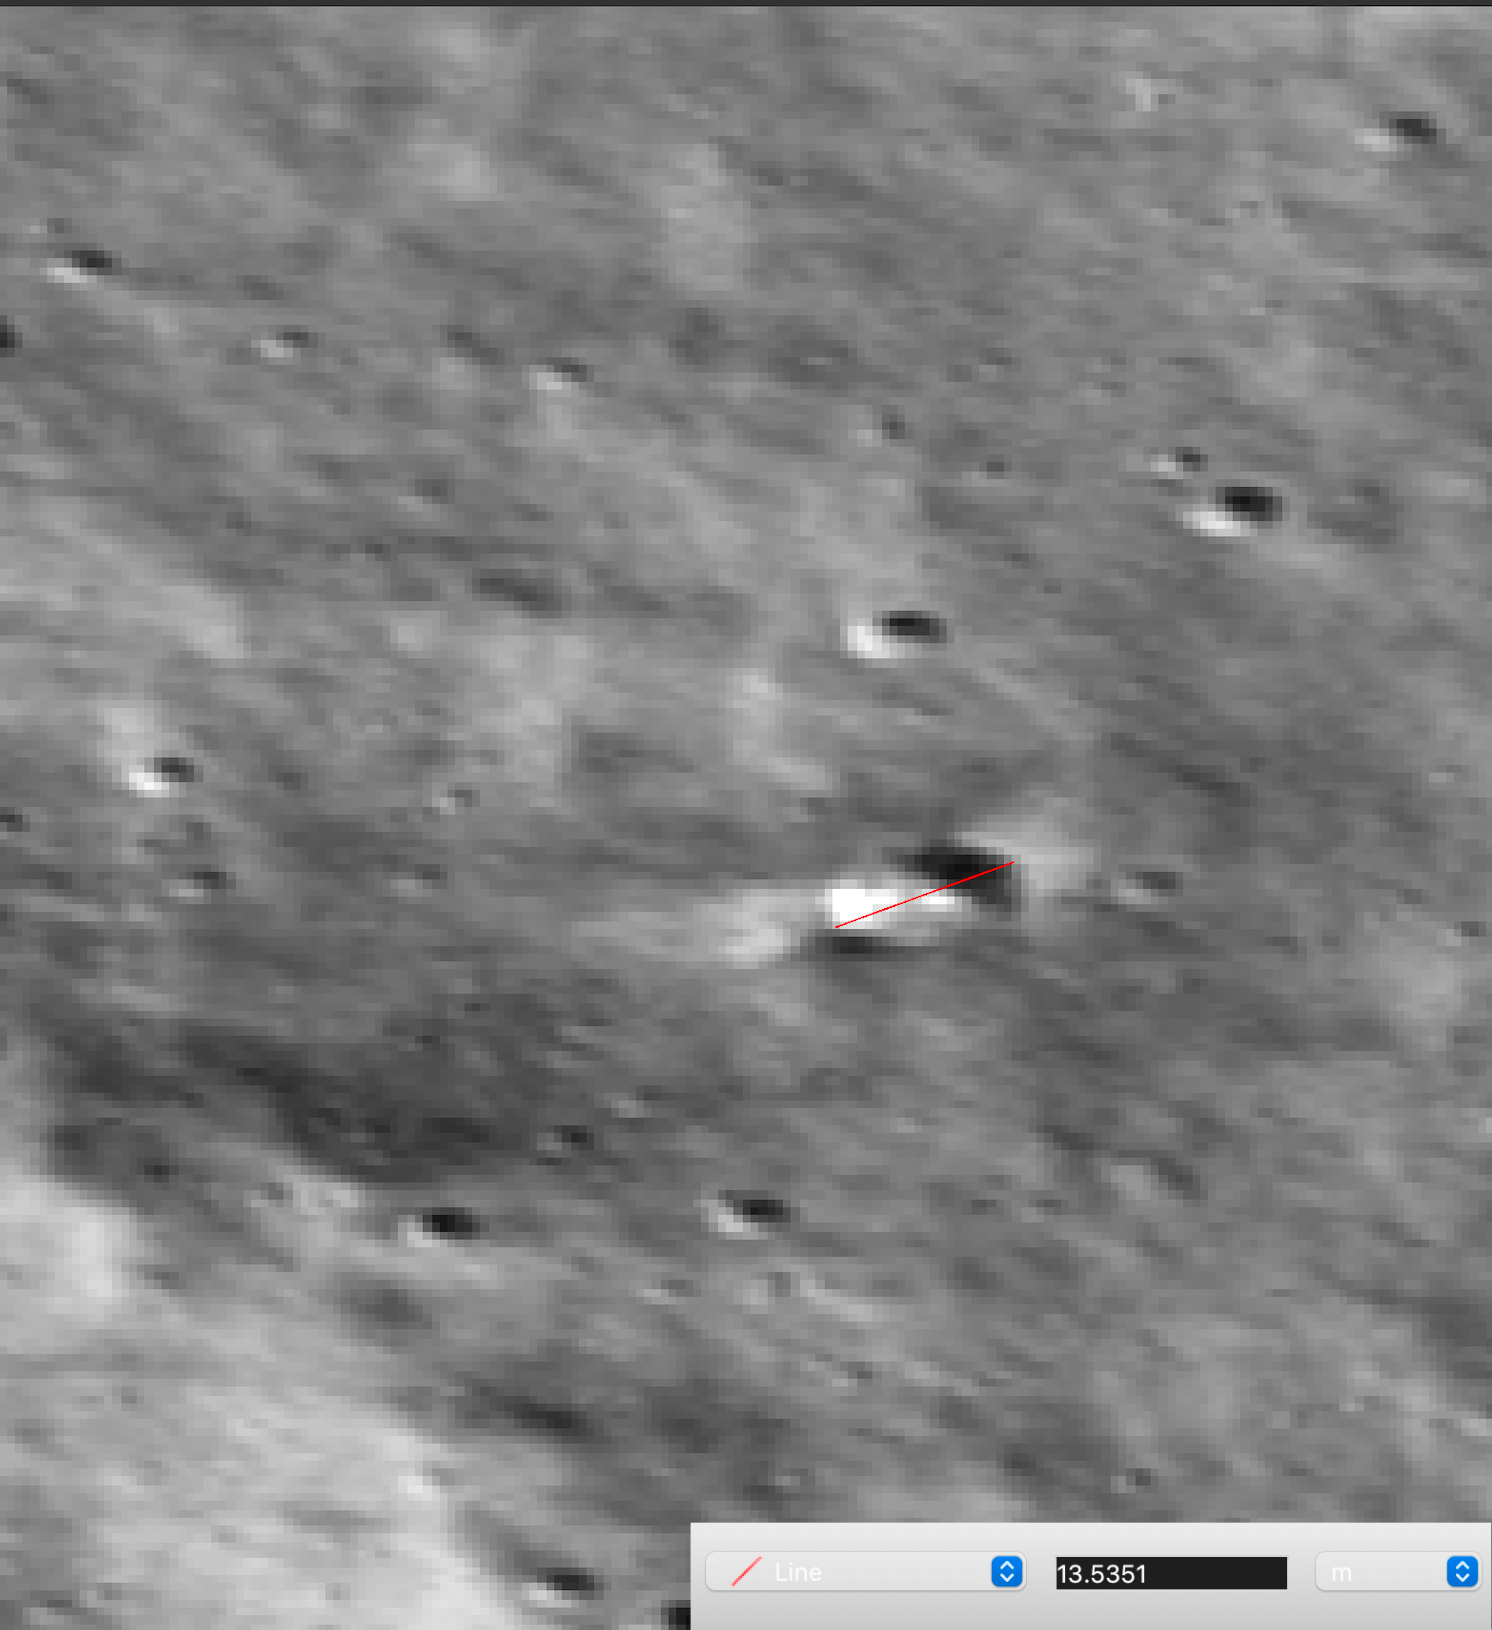 The crater resulting from the Luna 25 crash spans approximately 13.5 meters in diameter, marking a stark testament to the force of the impact.